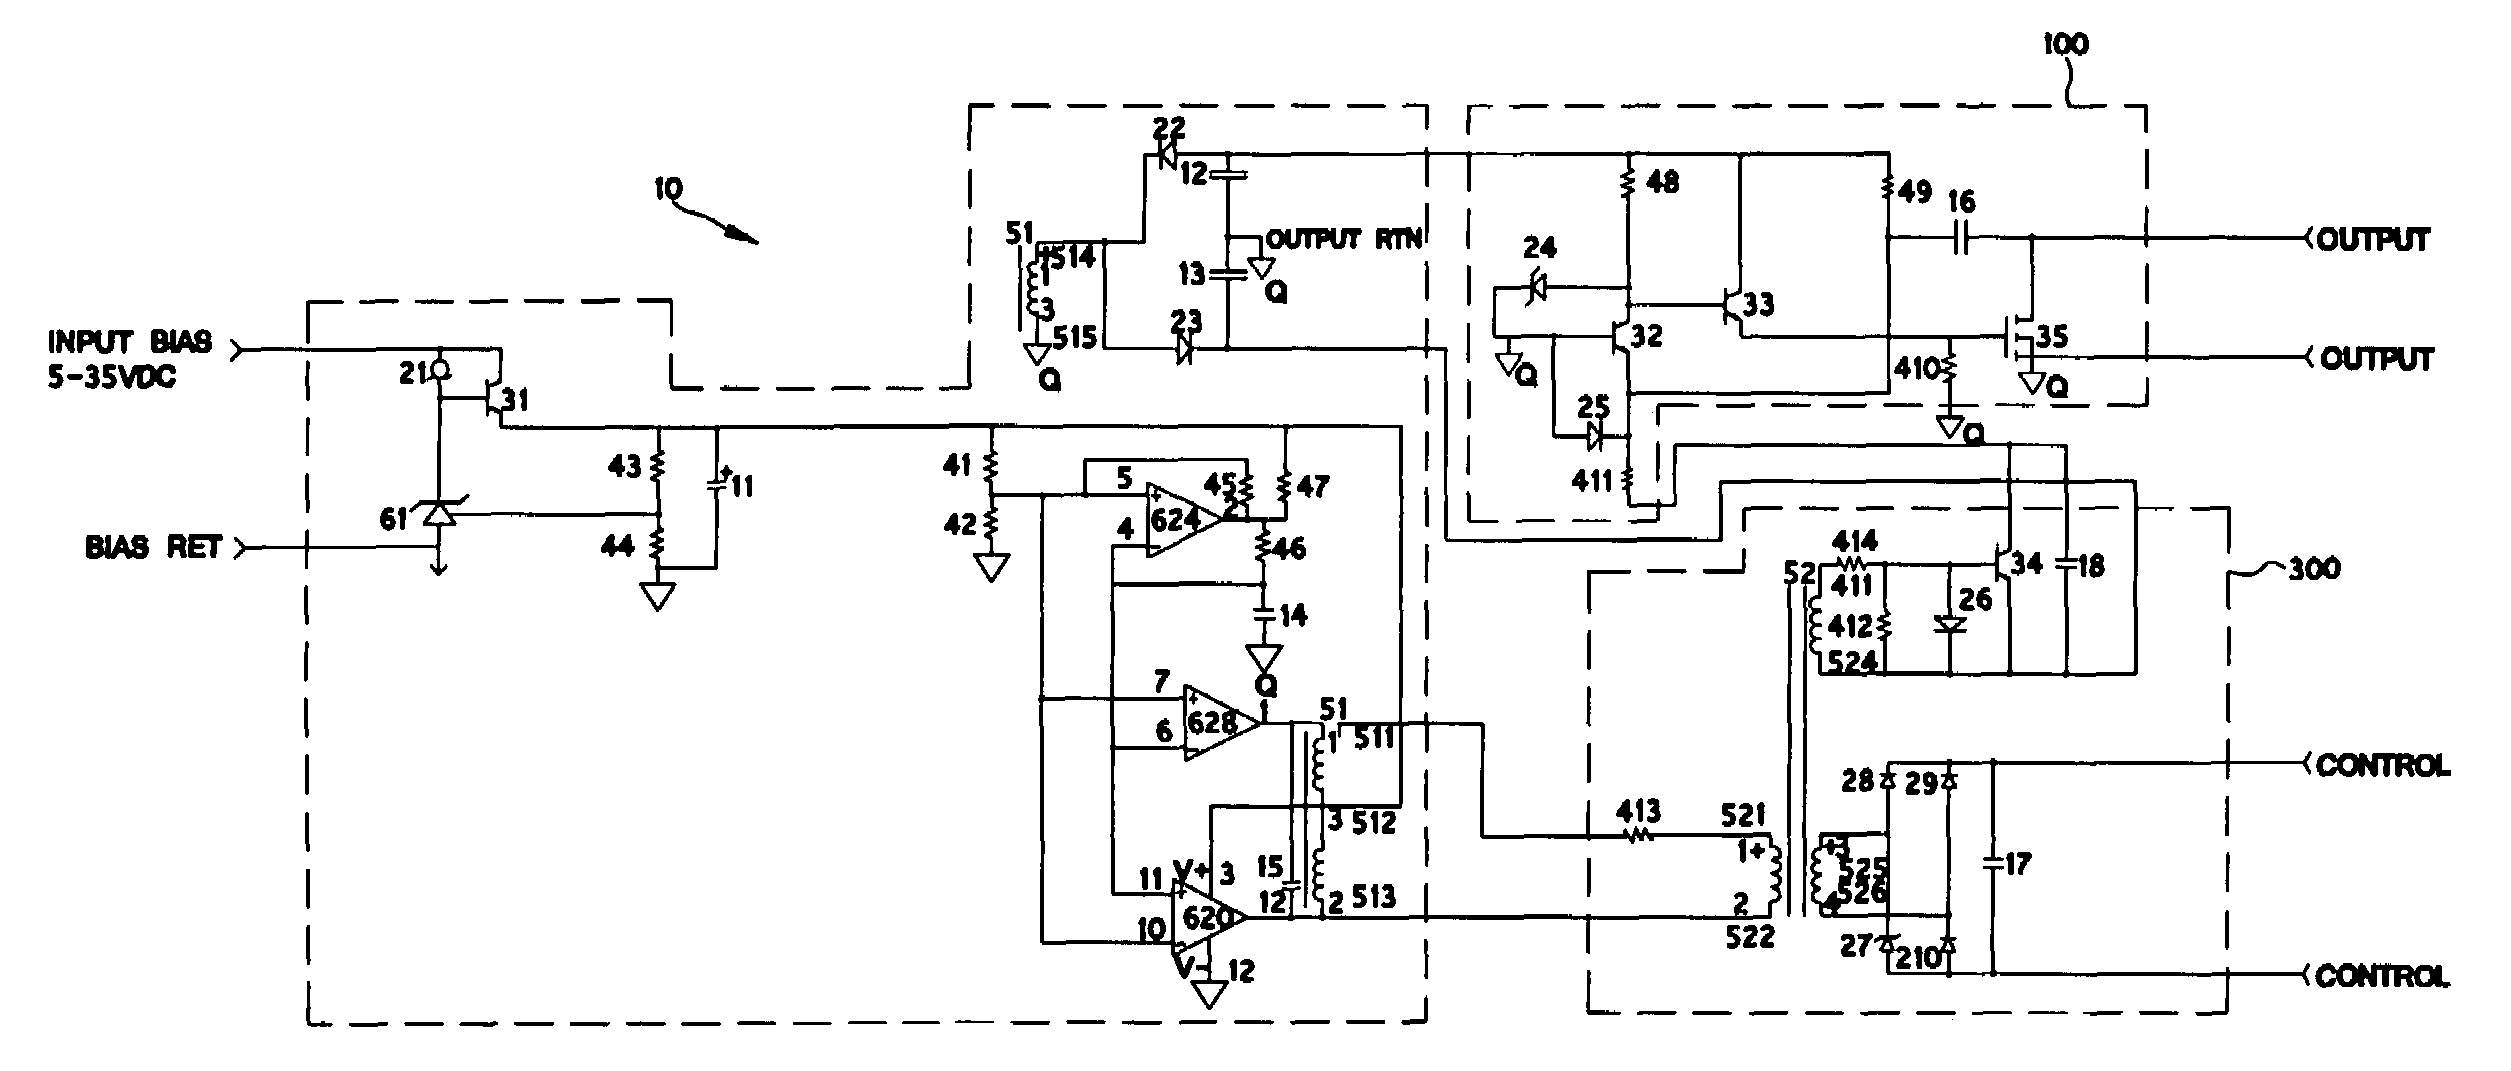 Radiation tolerant solid-state relay